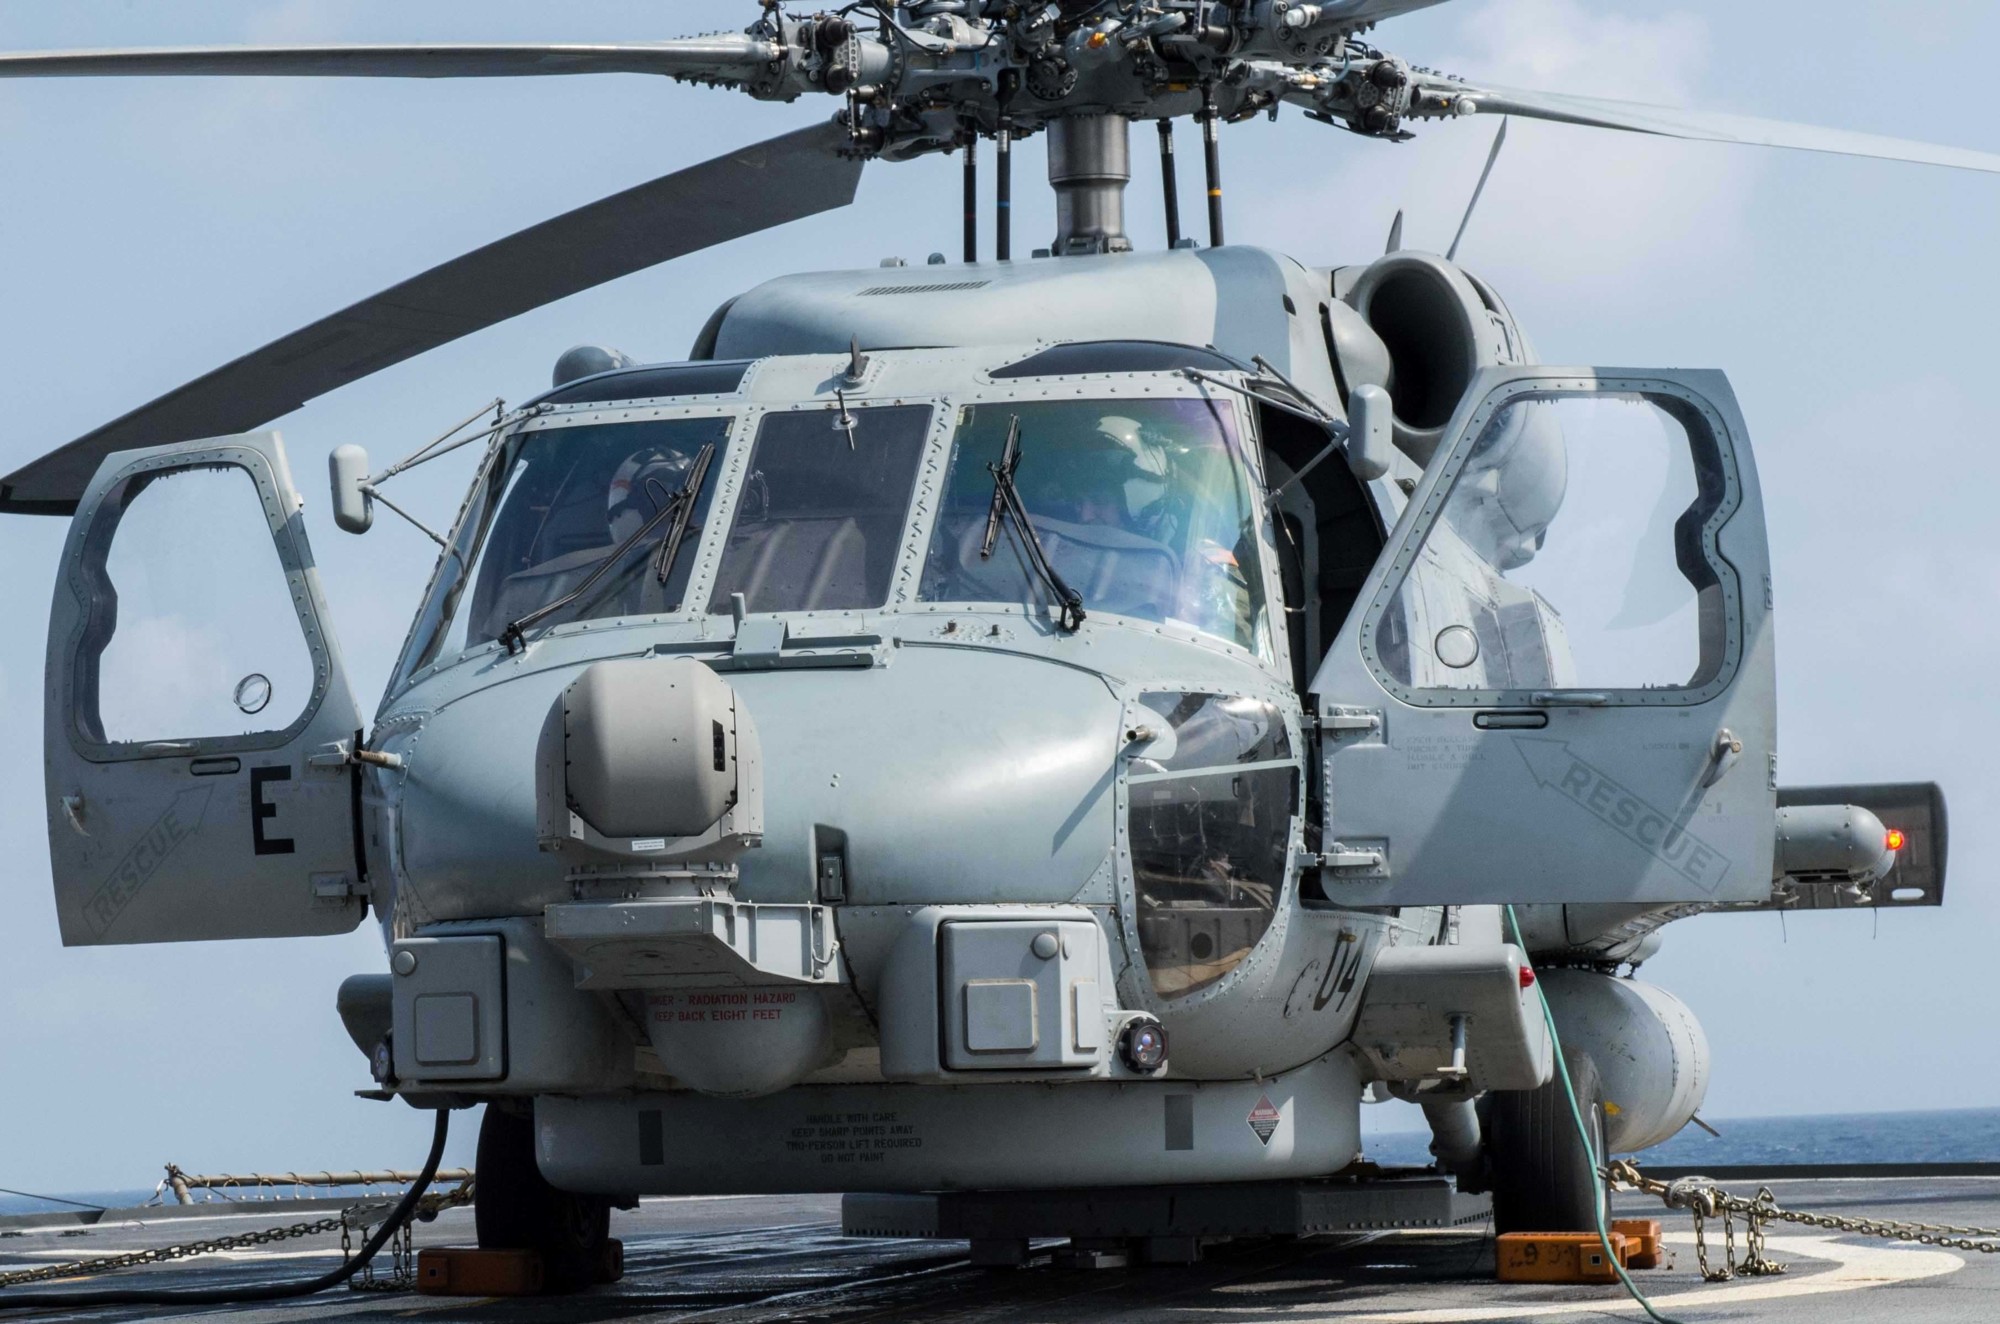 hsm-51 warlords helicopter maritime strike squadron mh-60r seahawk navy 2015 62